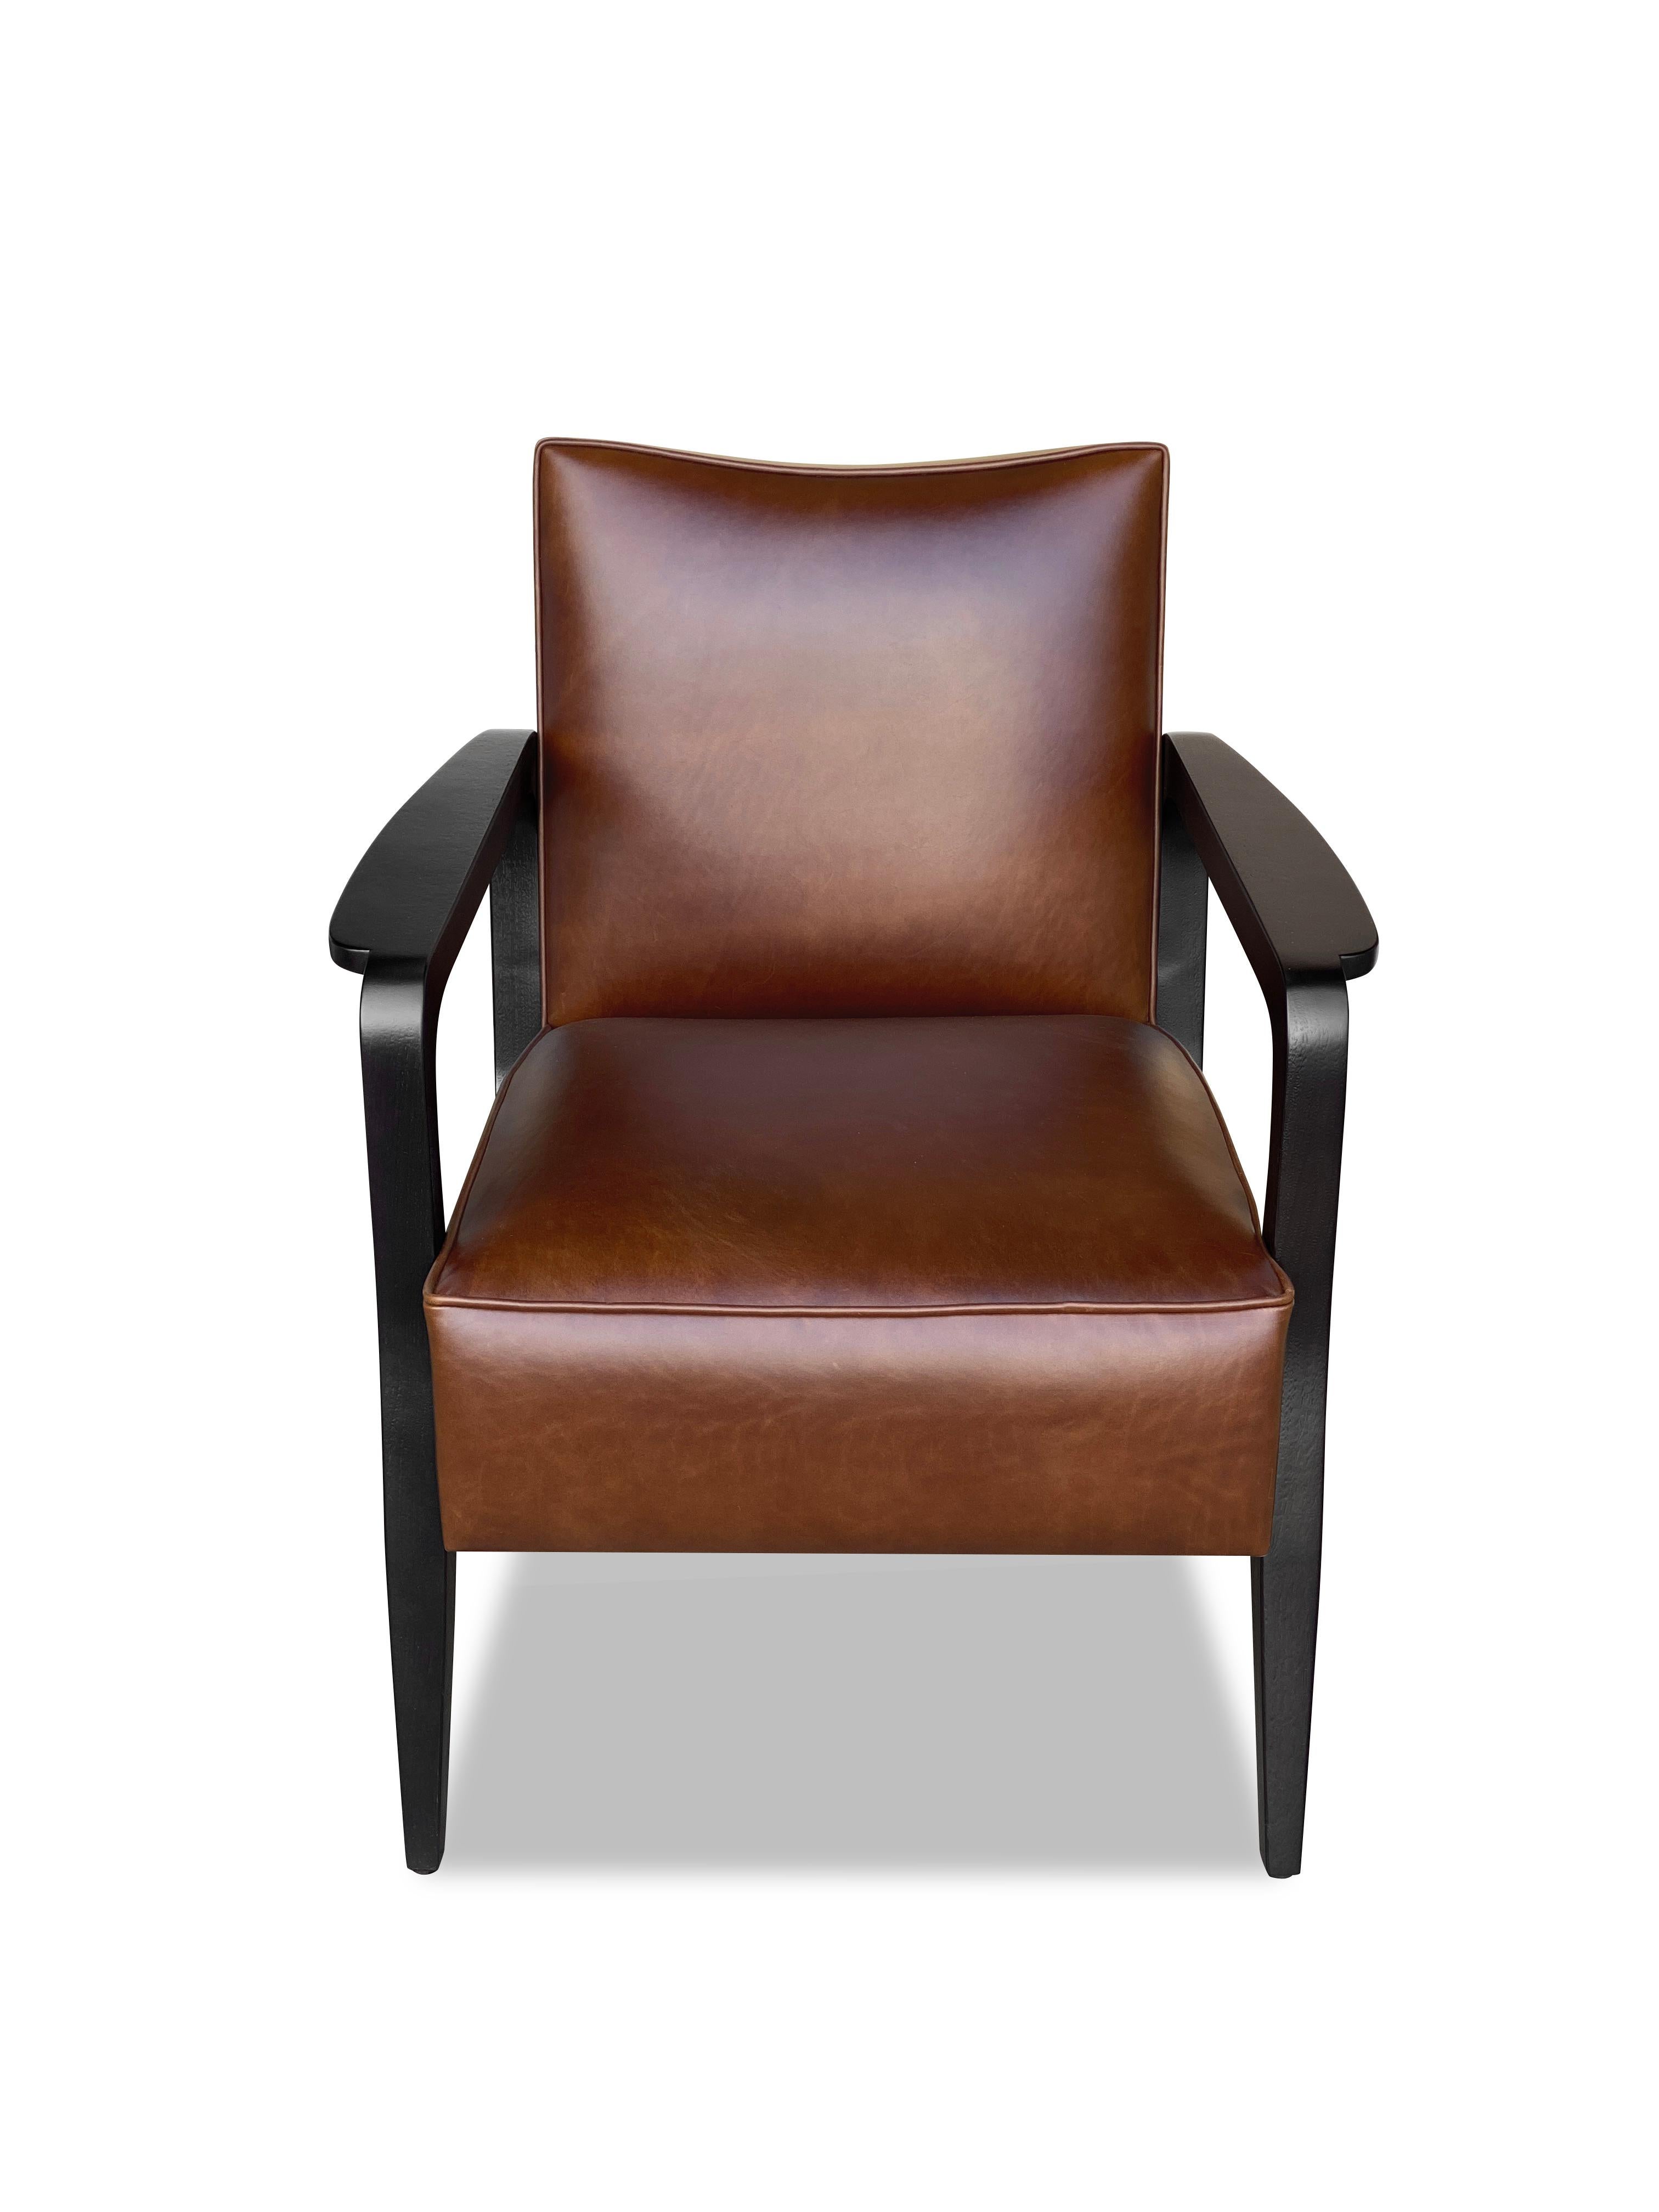 British Custom Made Atena Armchair in Walnut Black Ebony and Leather For Sale